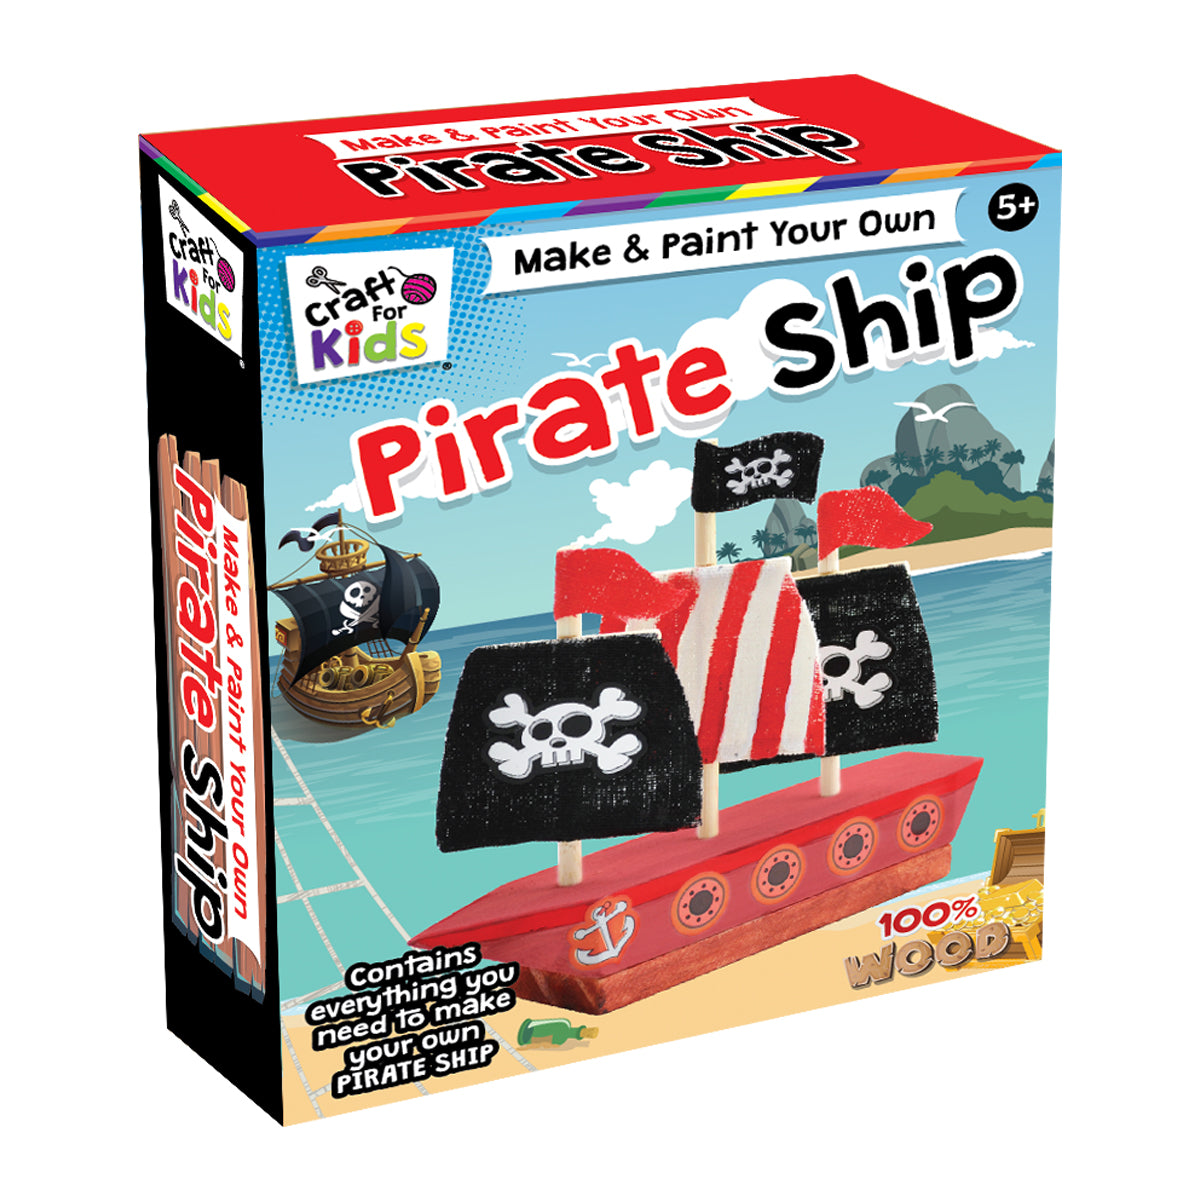 Make & Paint Your Own Pirate Ship – BMS Brands